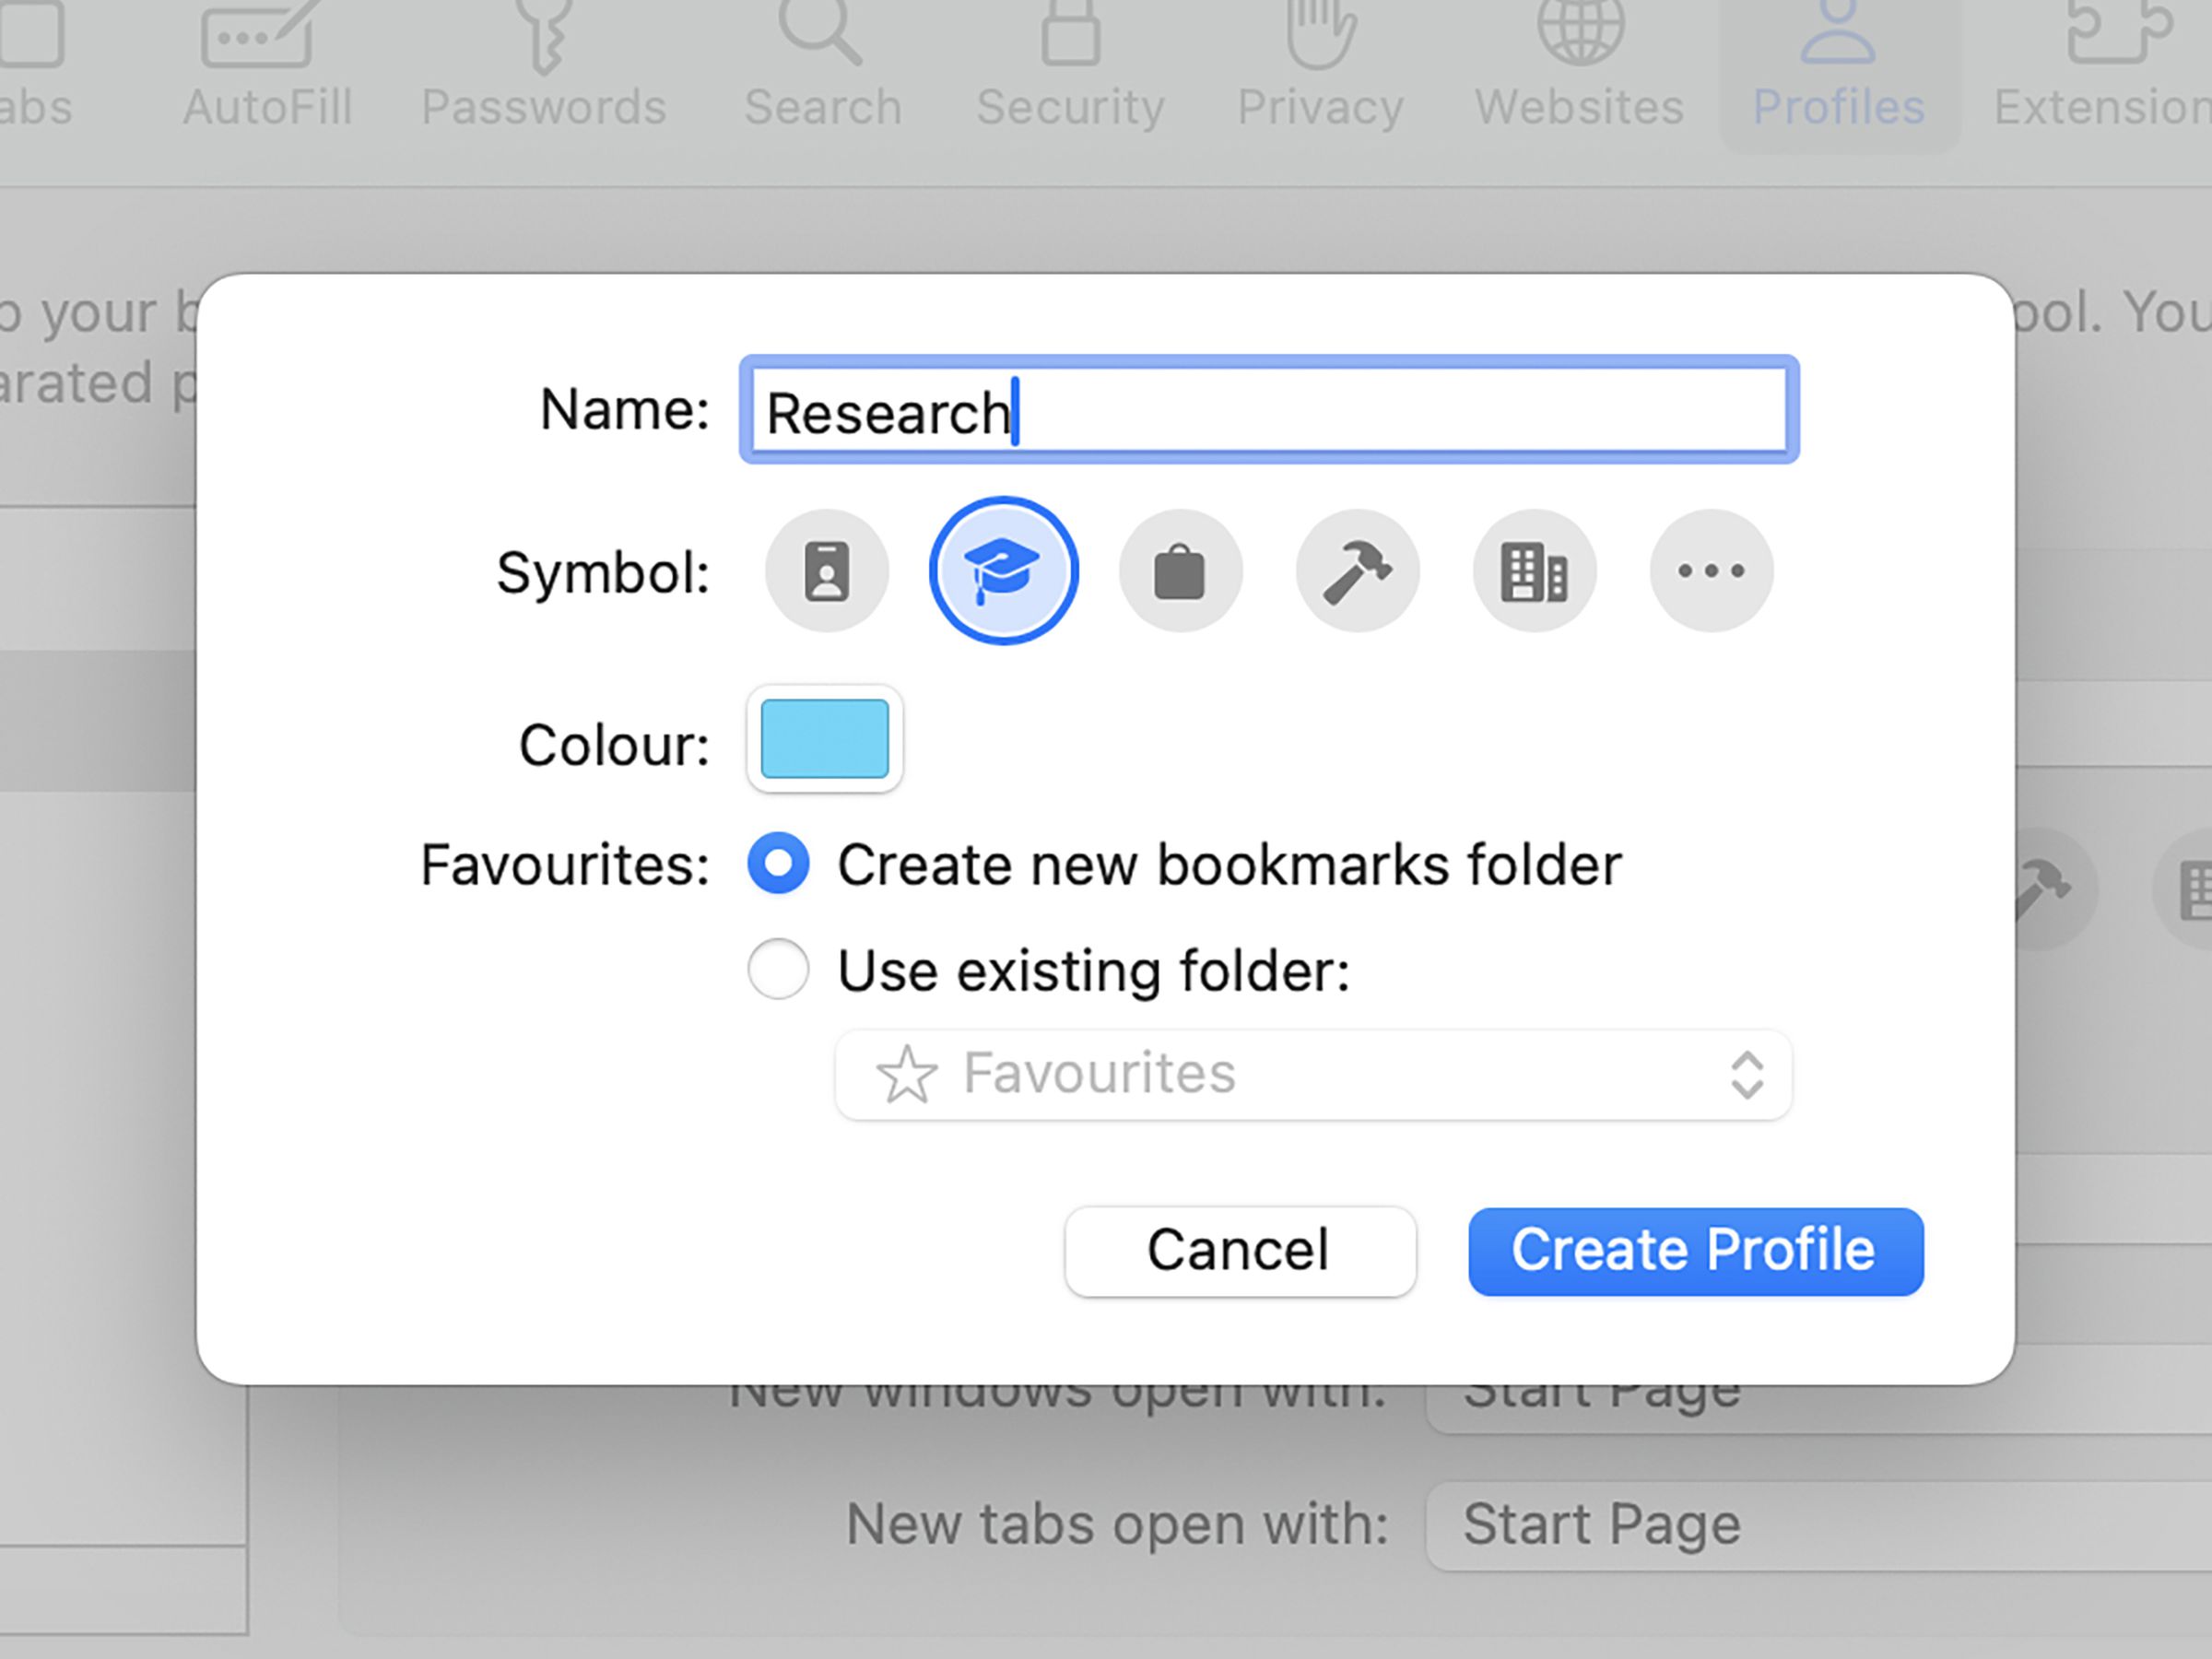 Pop-up windows with Name field (Research typed in), a choice of symbols, a color field, and what to do with favorites.